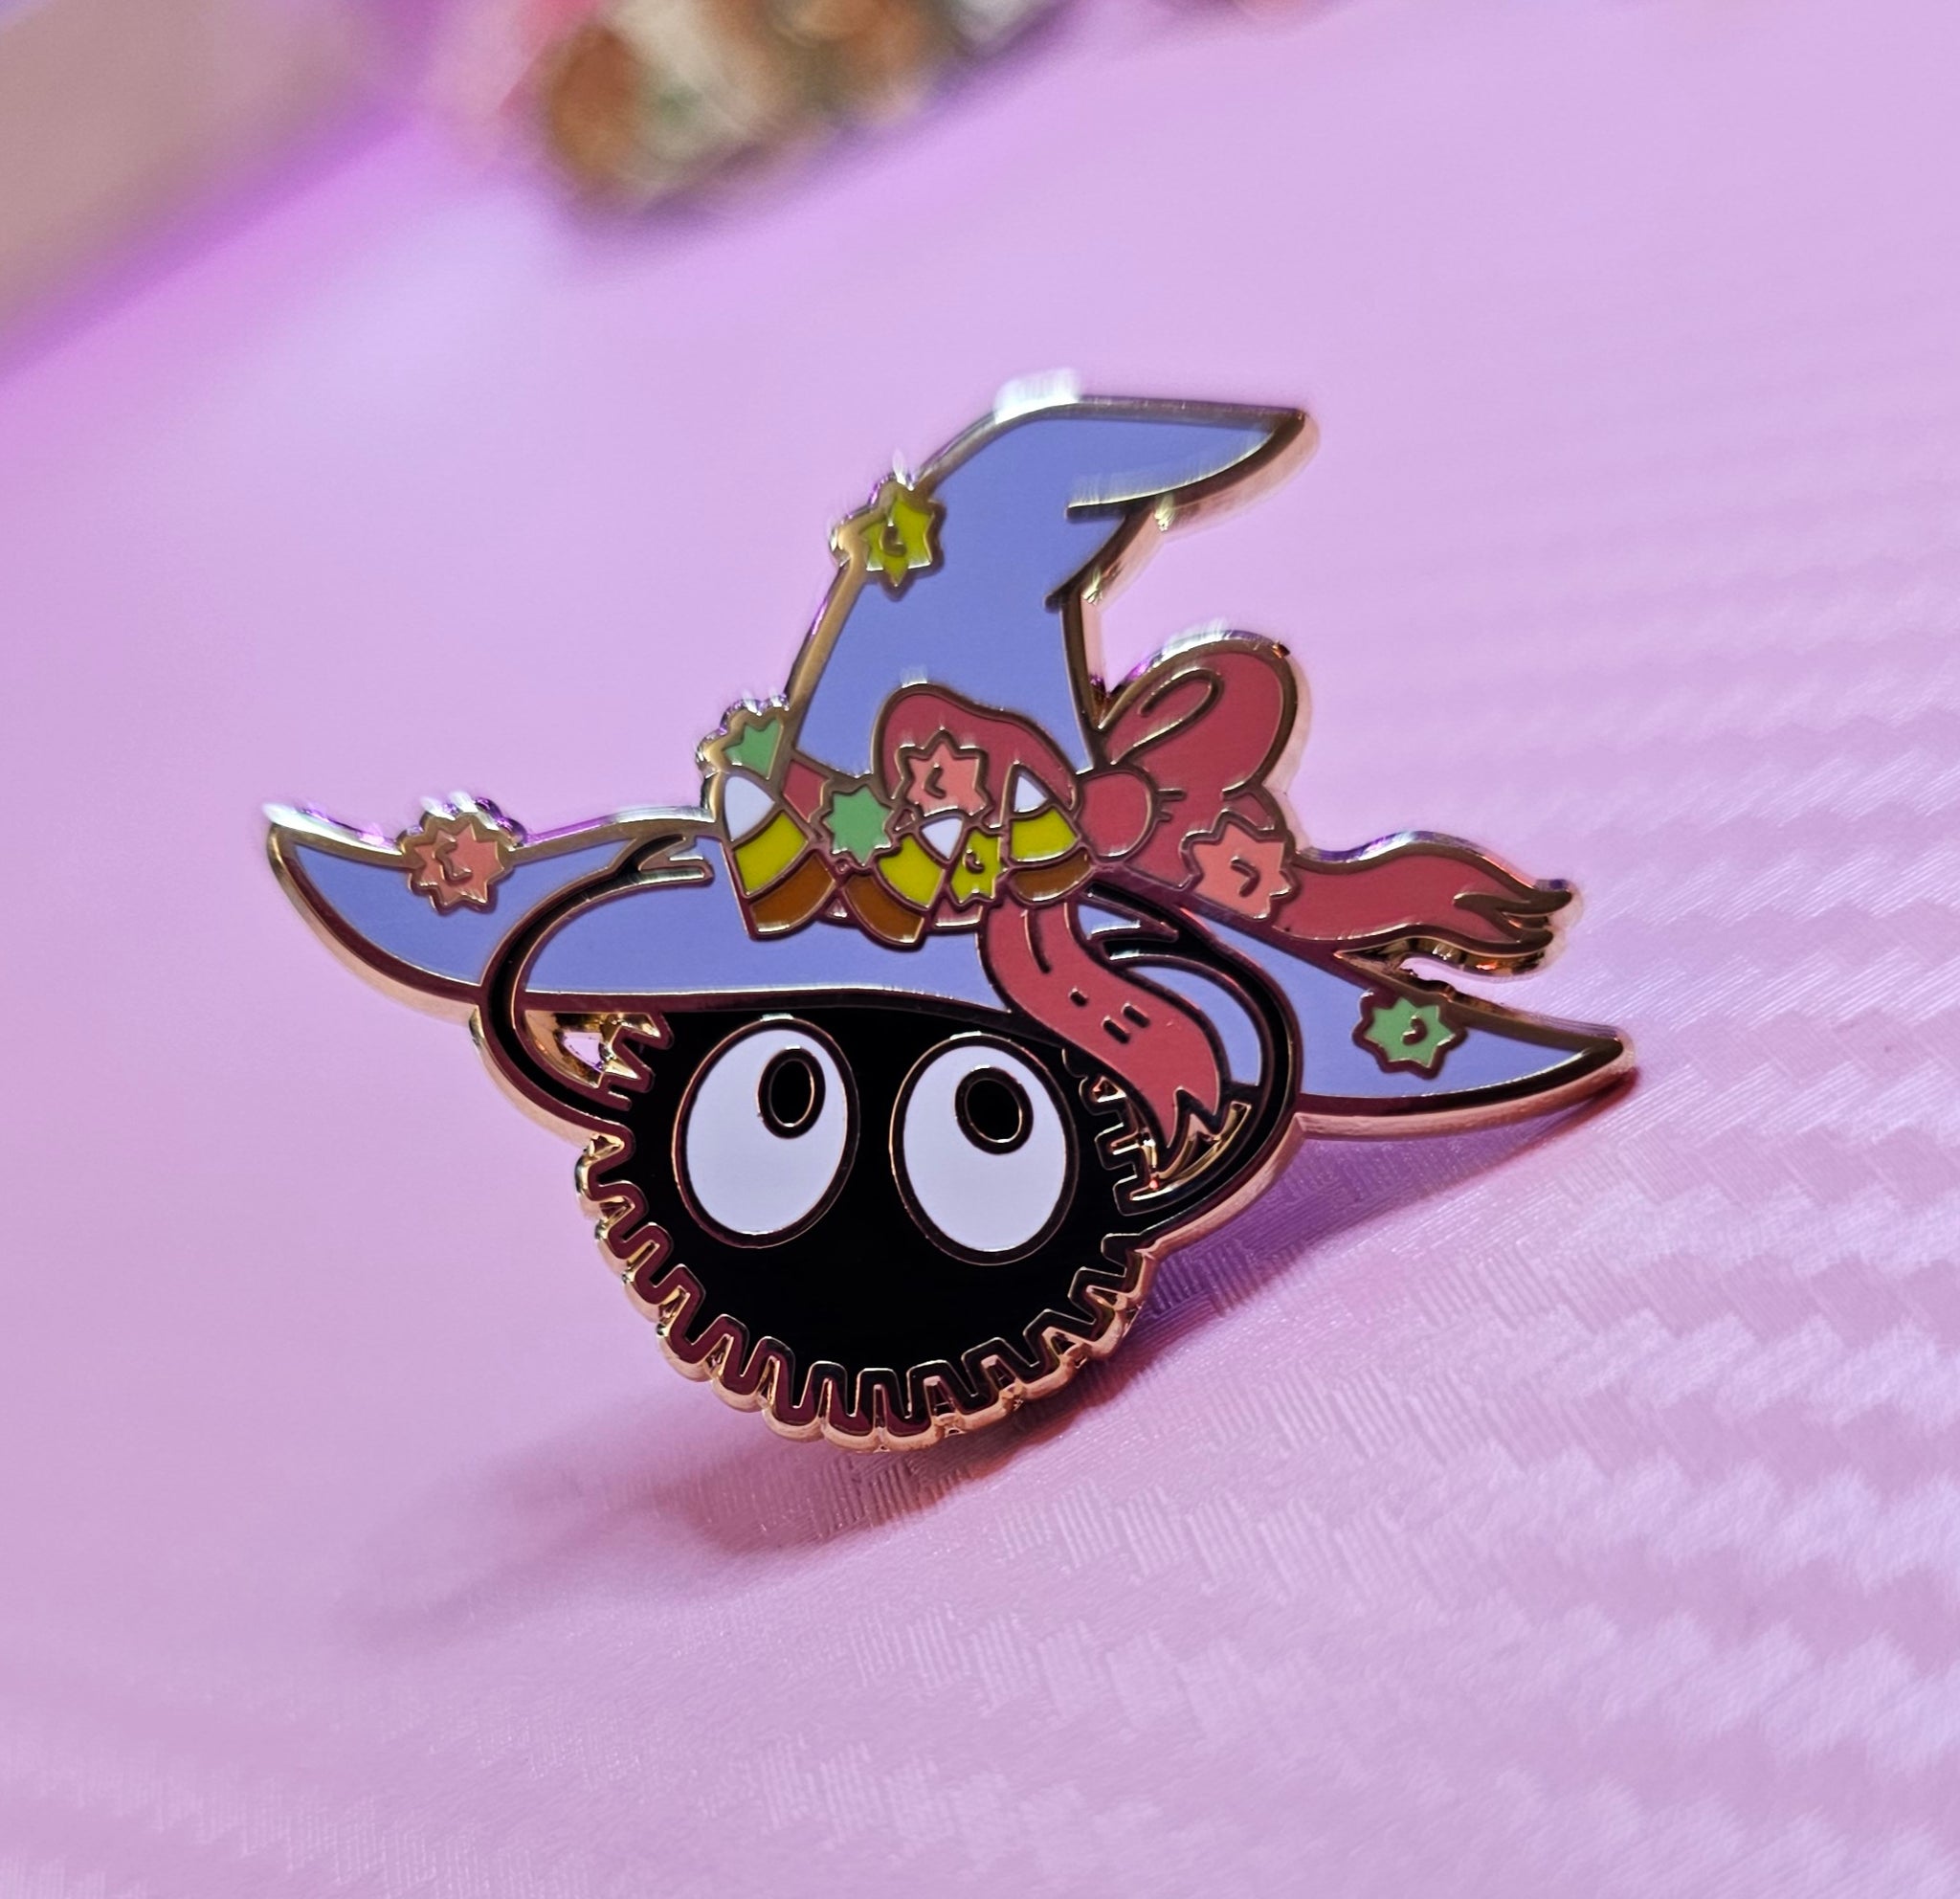 Pin on Character inspiration